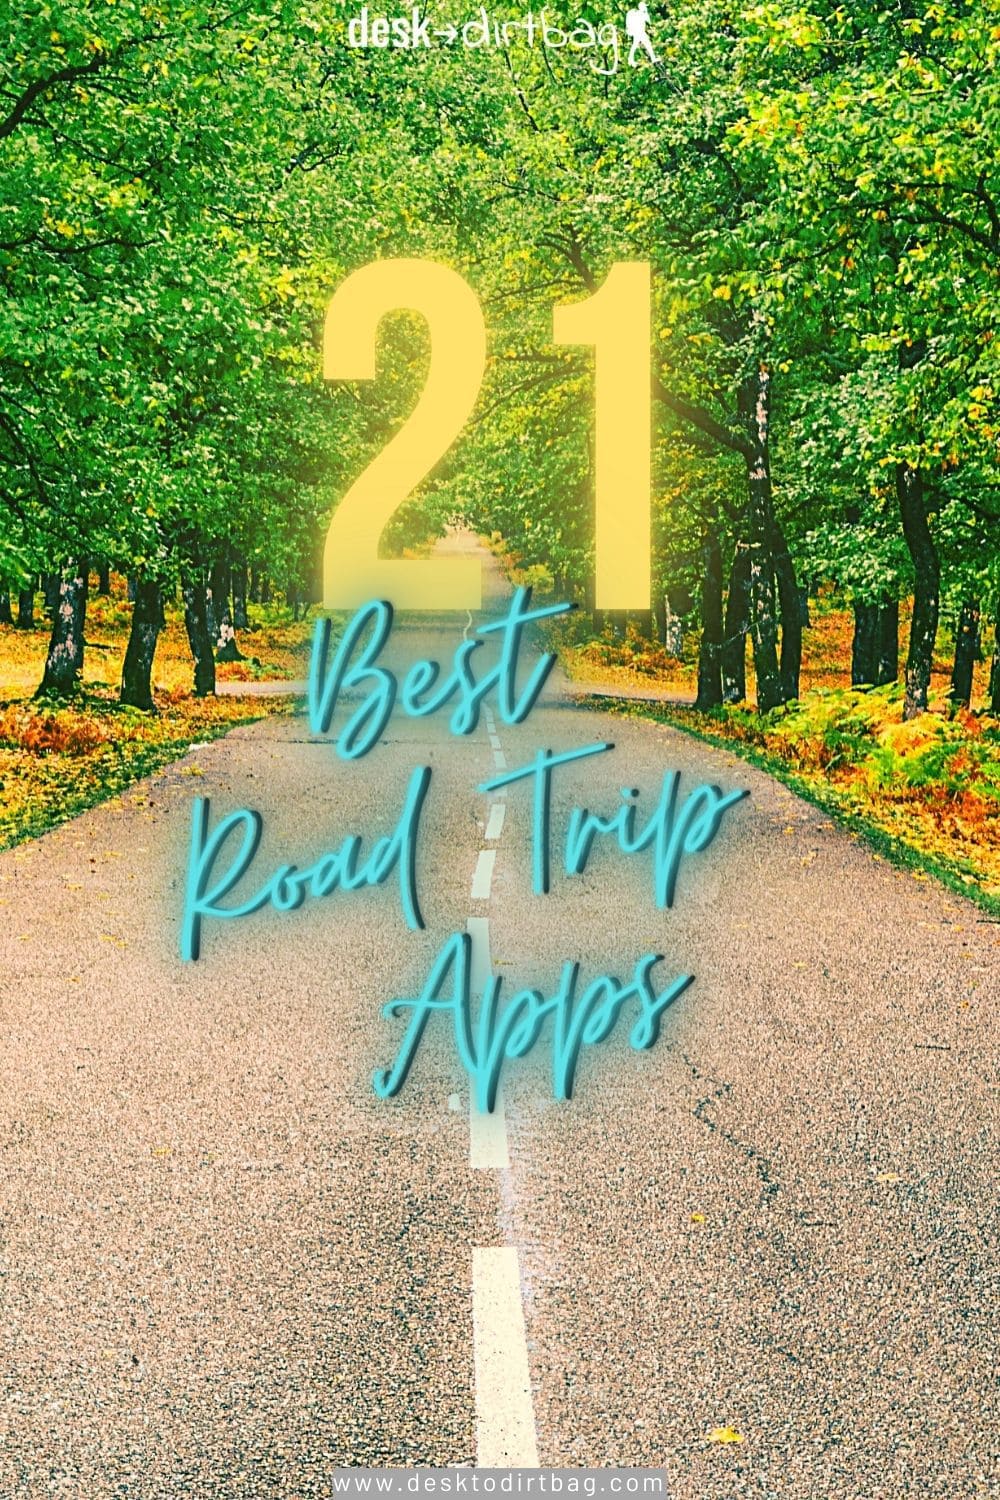 21 Best Road Trip Apps to Use While Road Tripping Across America